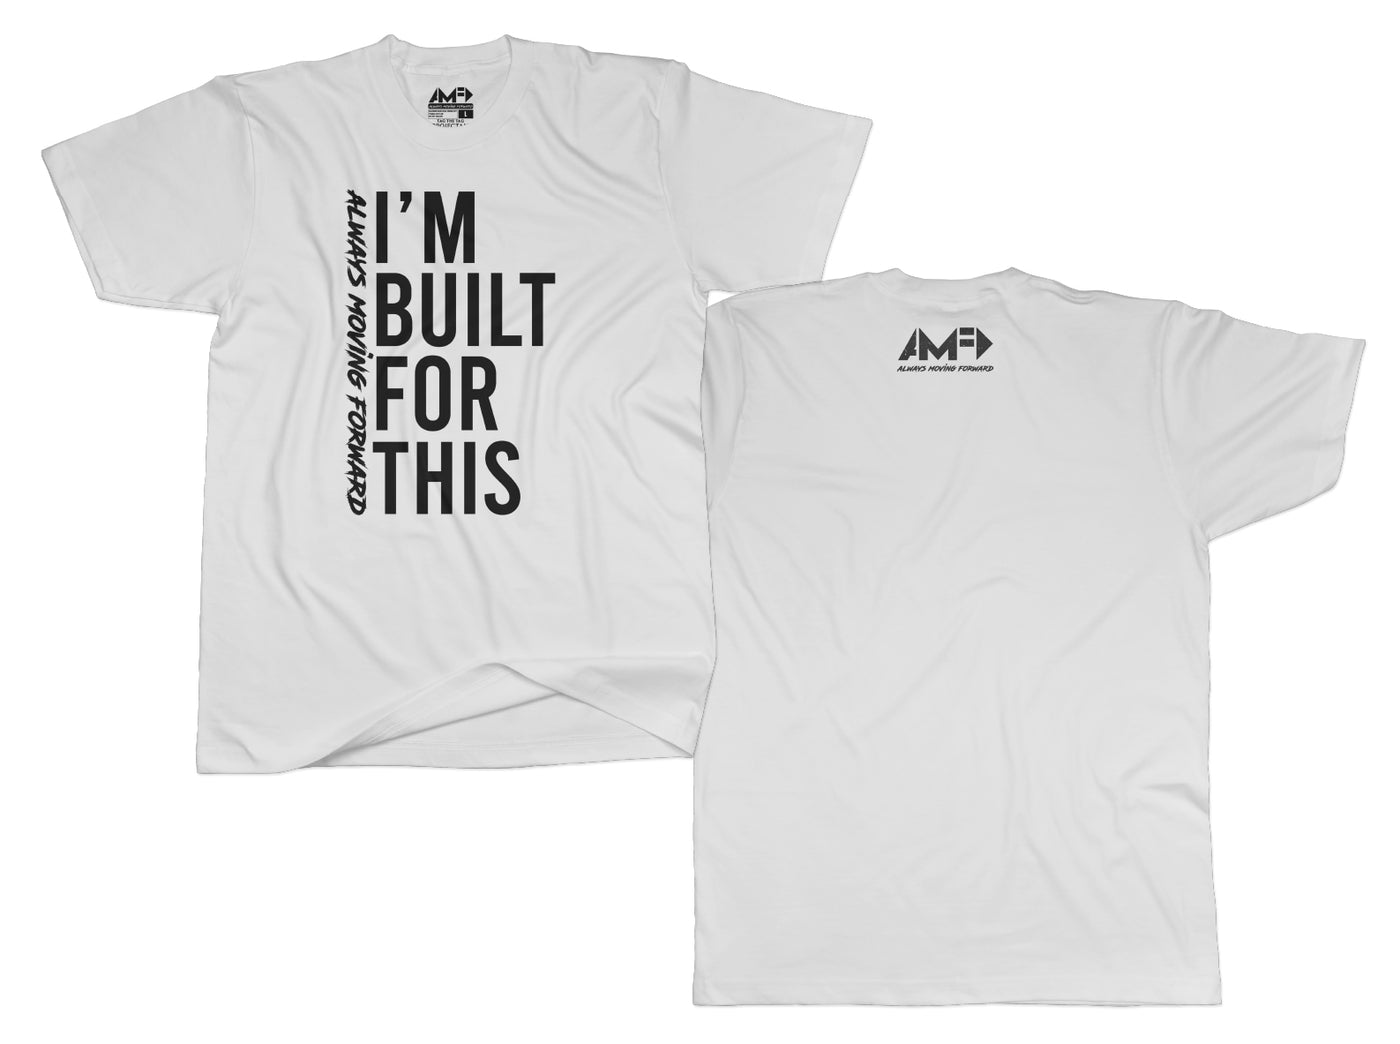 AMF "BUILT FOR THIS" TEE